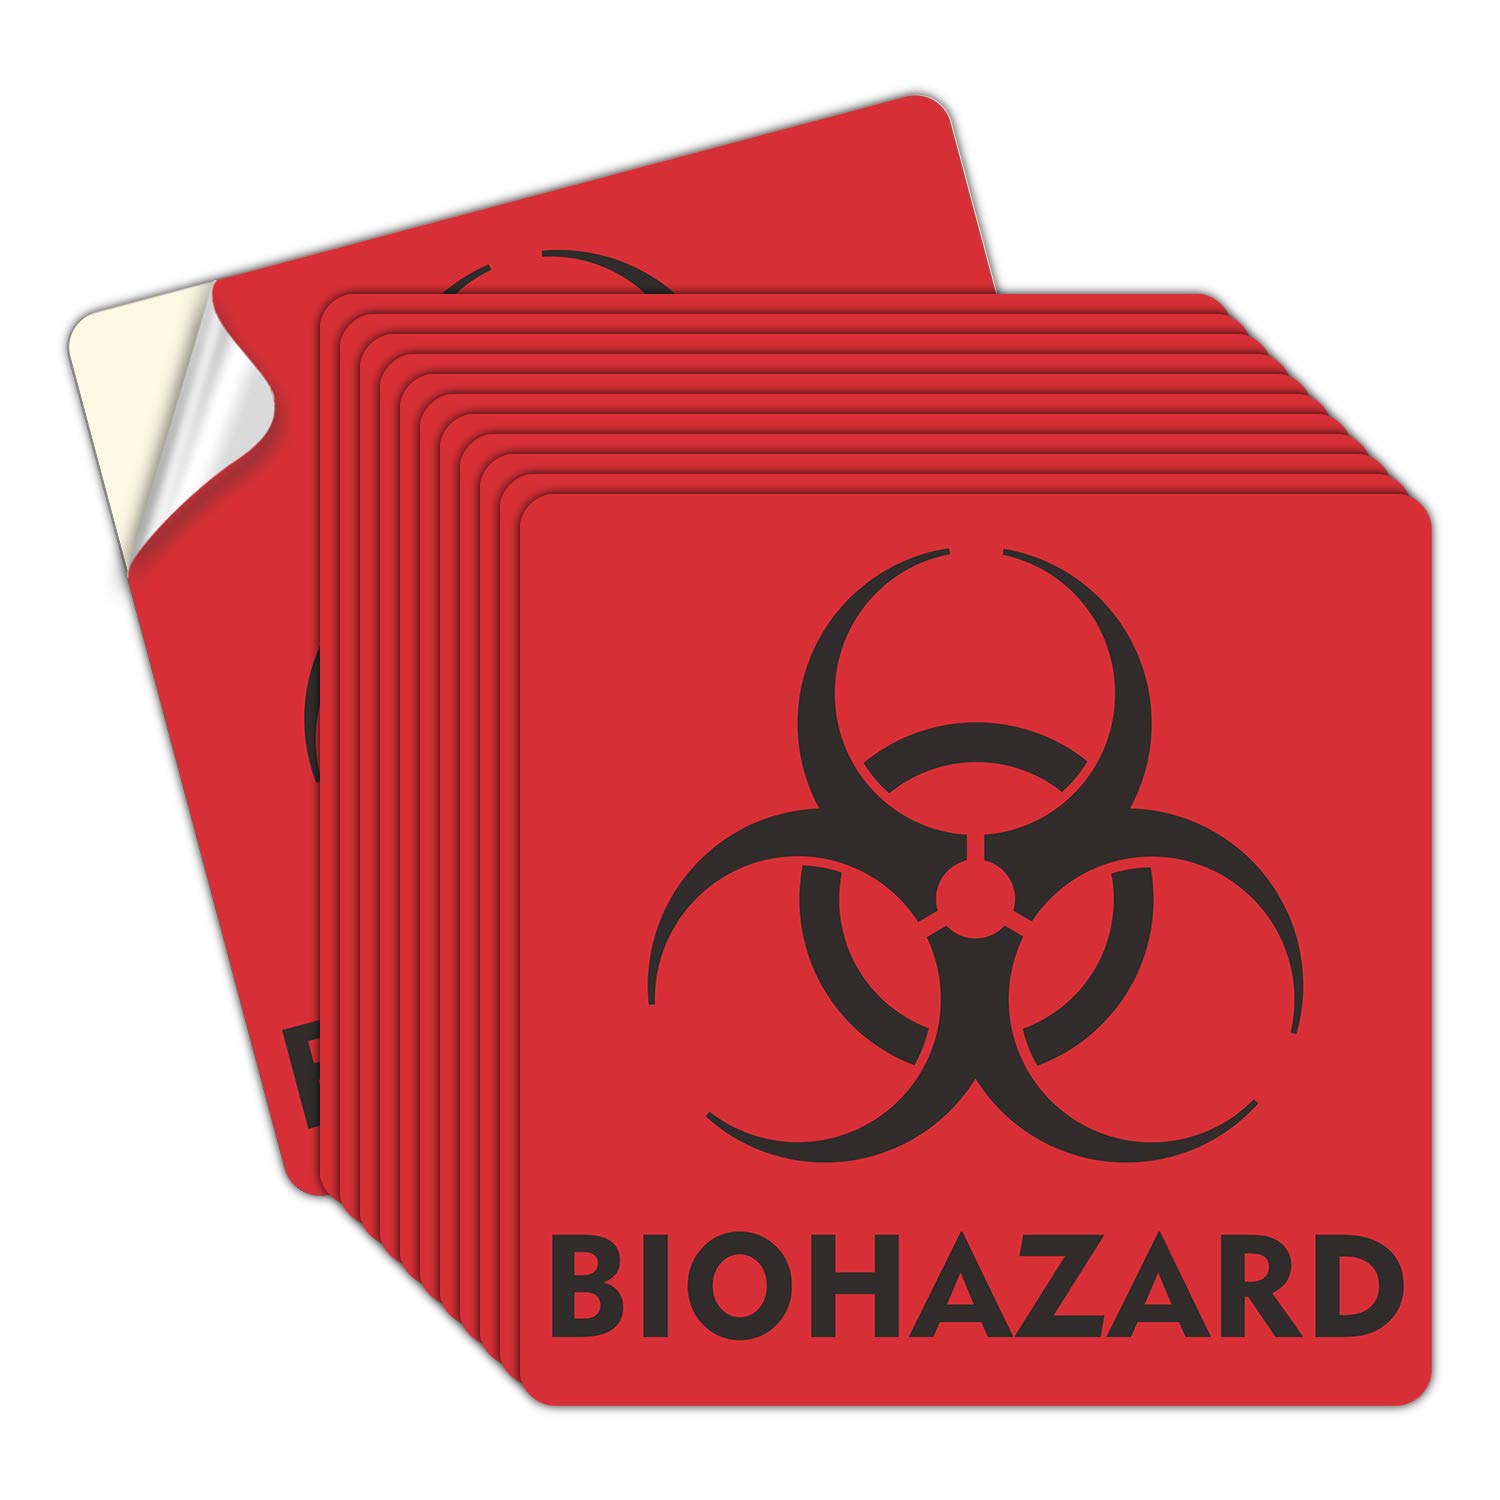 (12 Pack) Biohazard Stickers Sign, 6x6 Inches Waterproof Biohazard Warning Label，6 Mil Vinyl Self Adhesive Durable Decal Stickers Use for Labs, Hospitals and Industrial